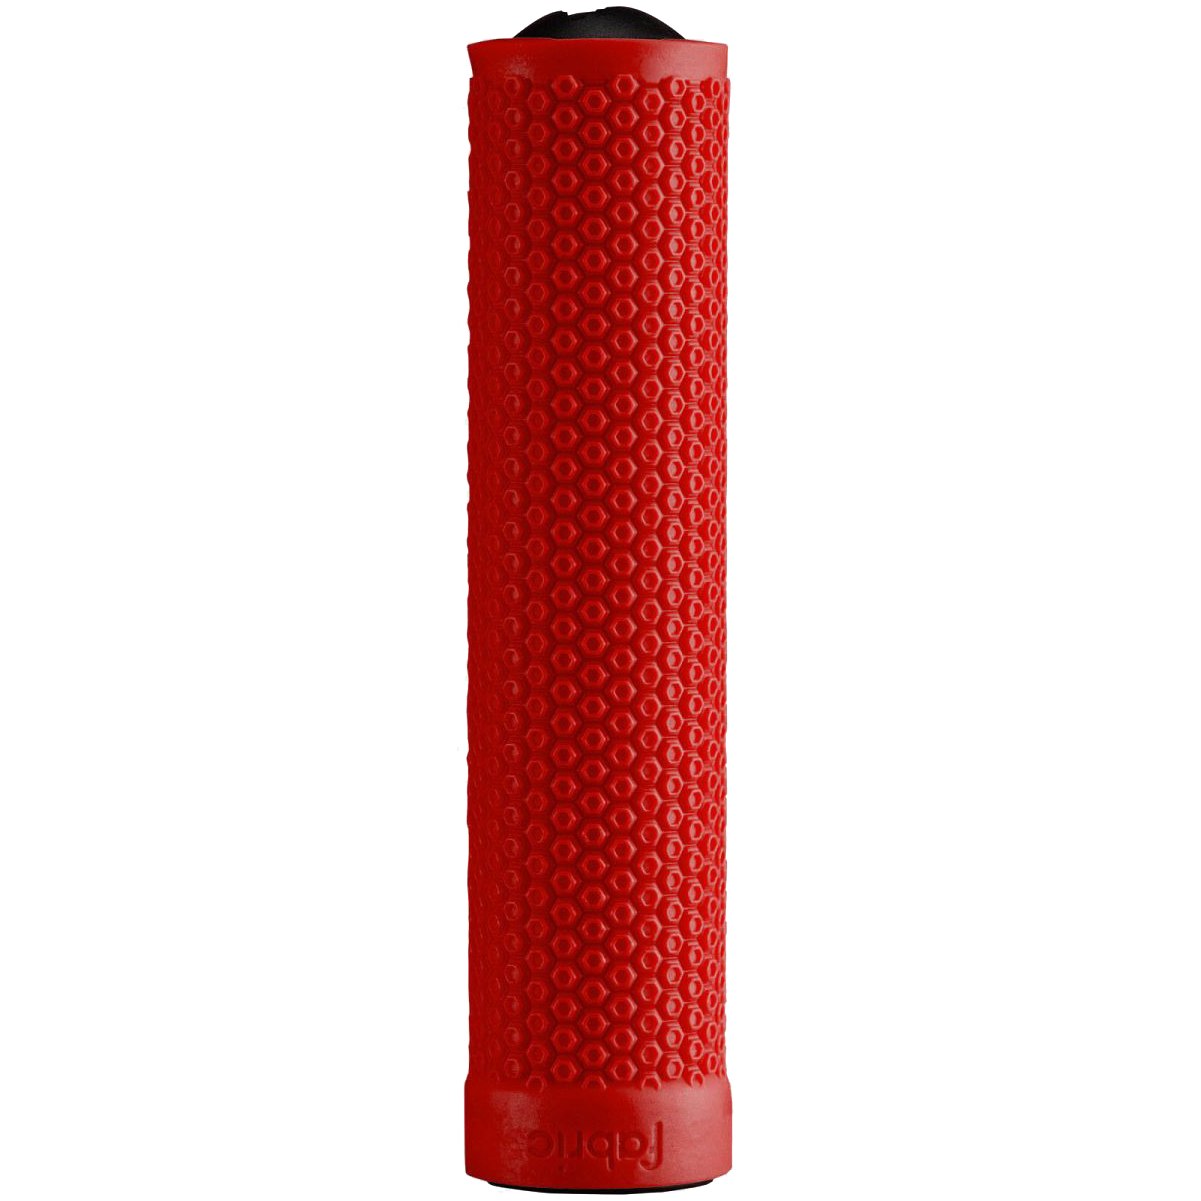 Image of Fabric AM Handlebar Grips - red